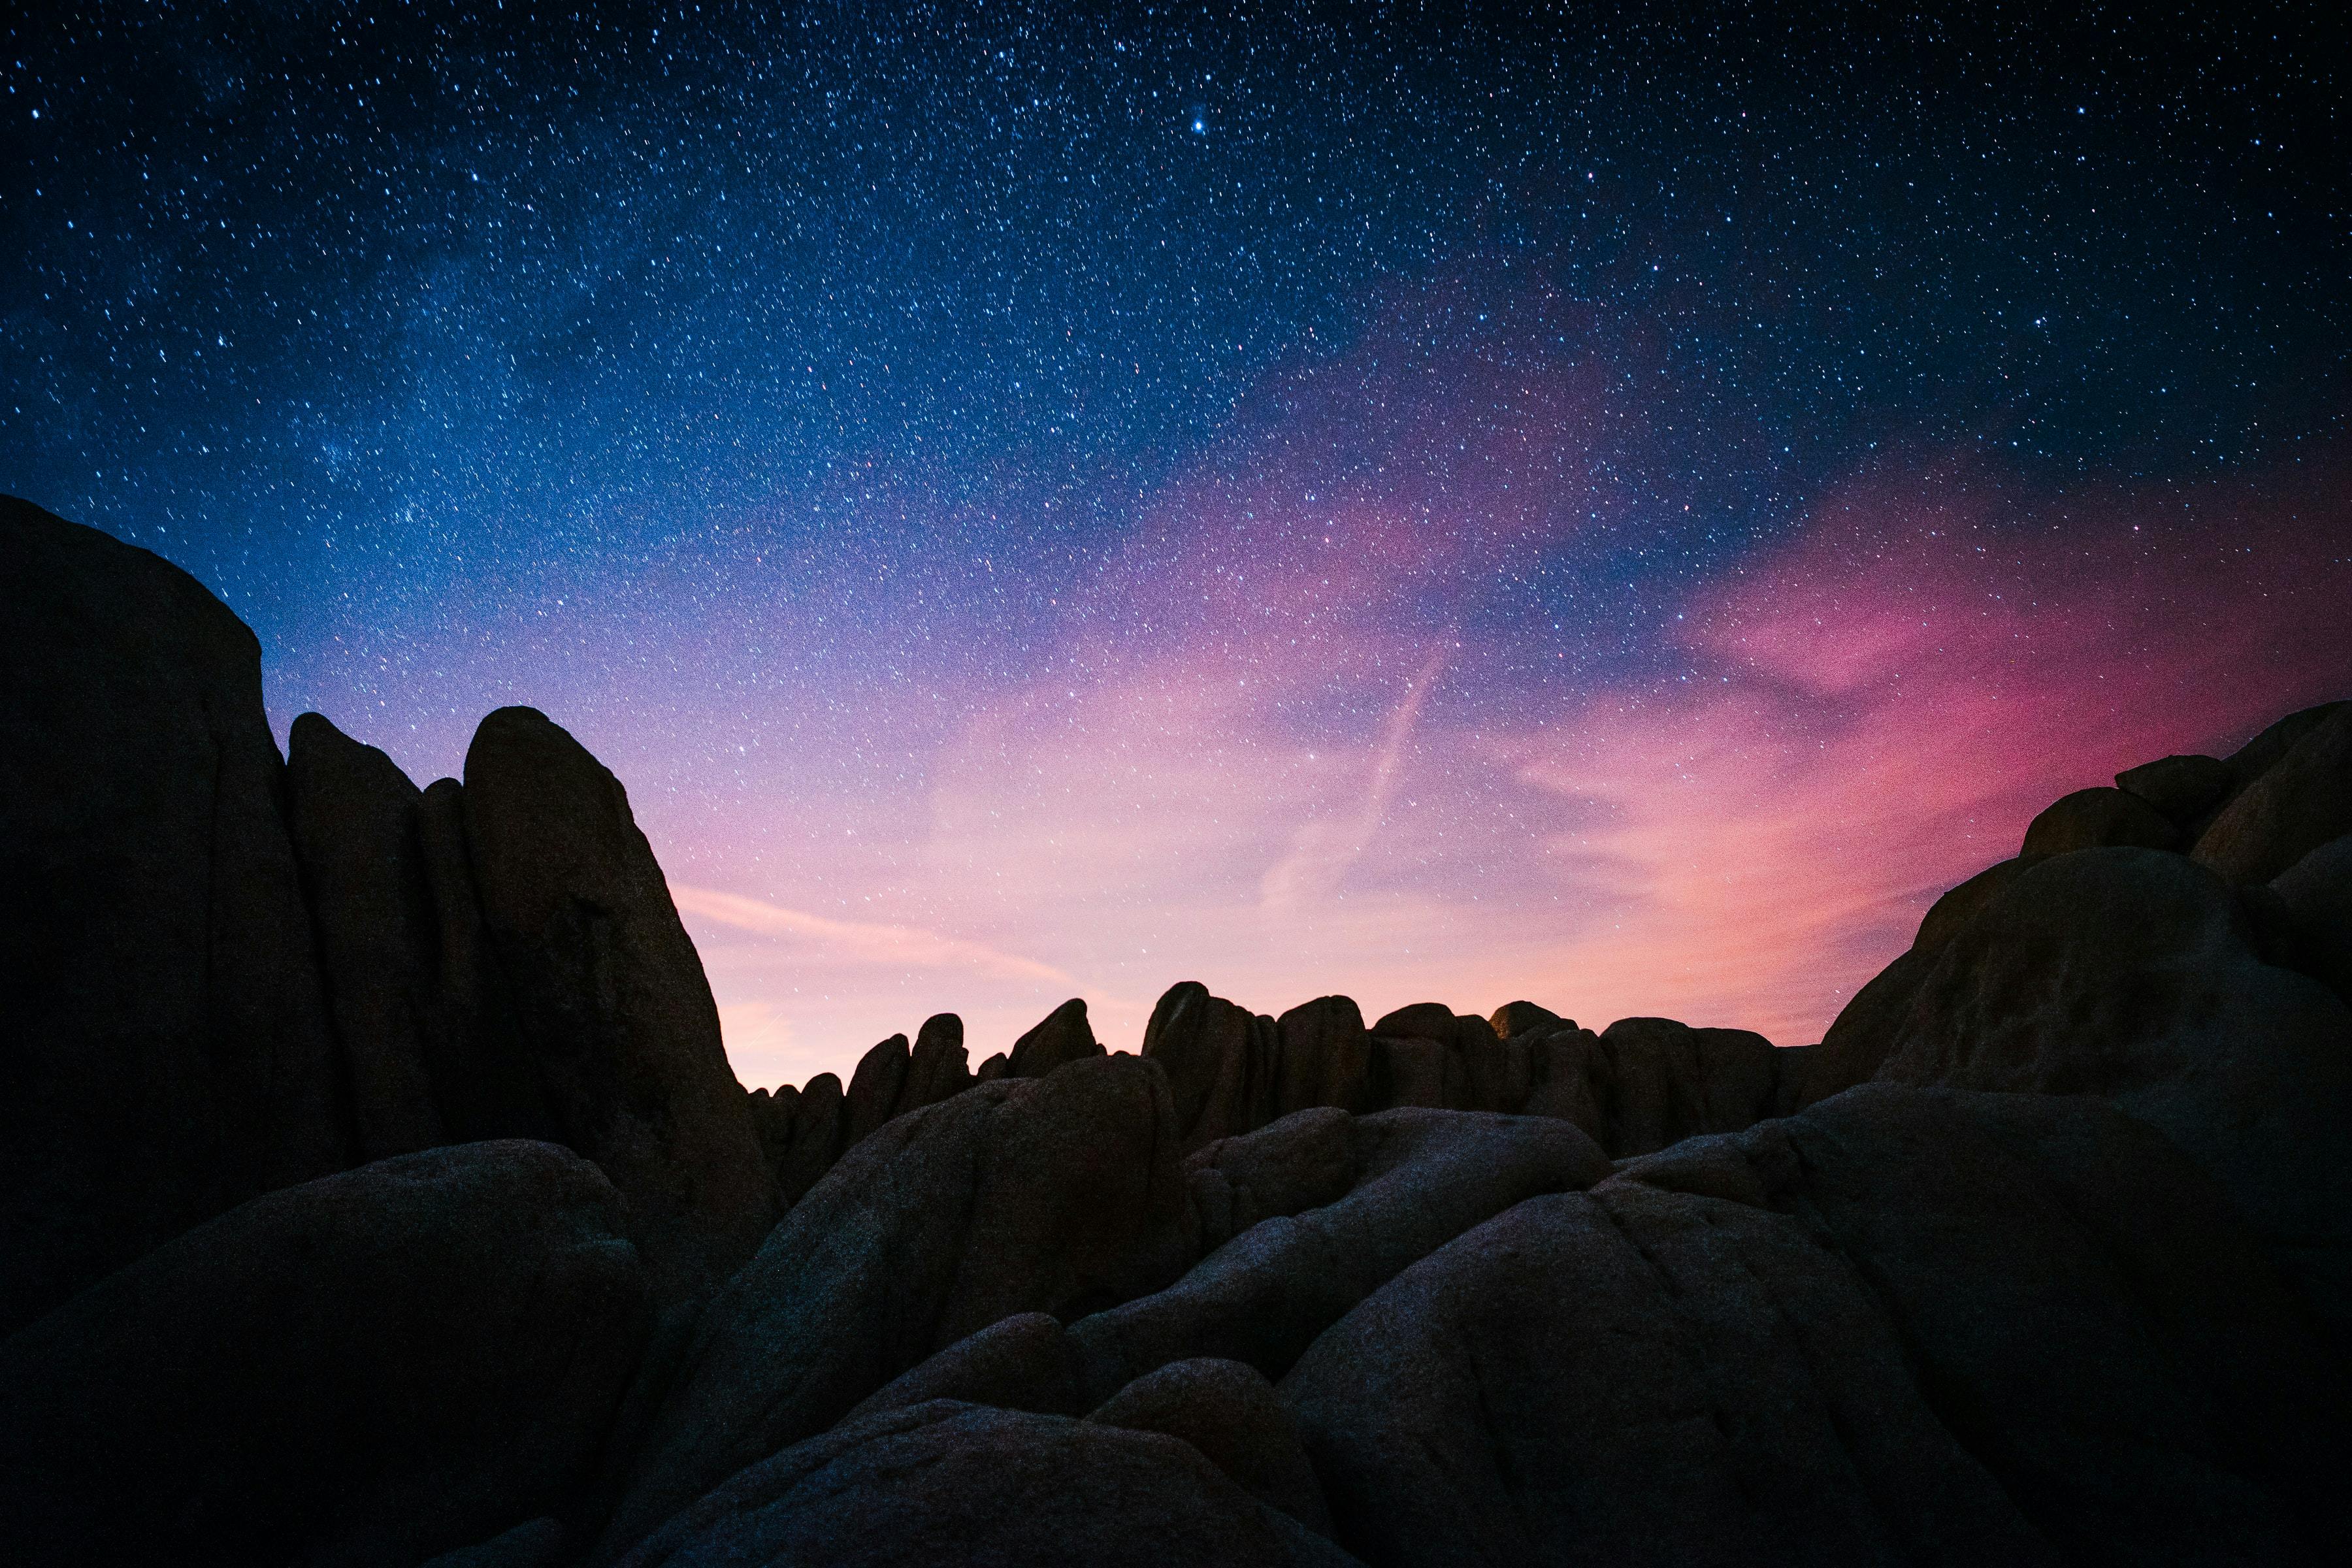 Brightly colored sky with stars over some rock formations.